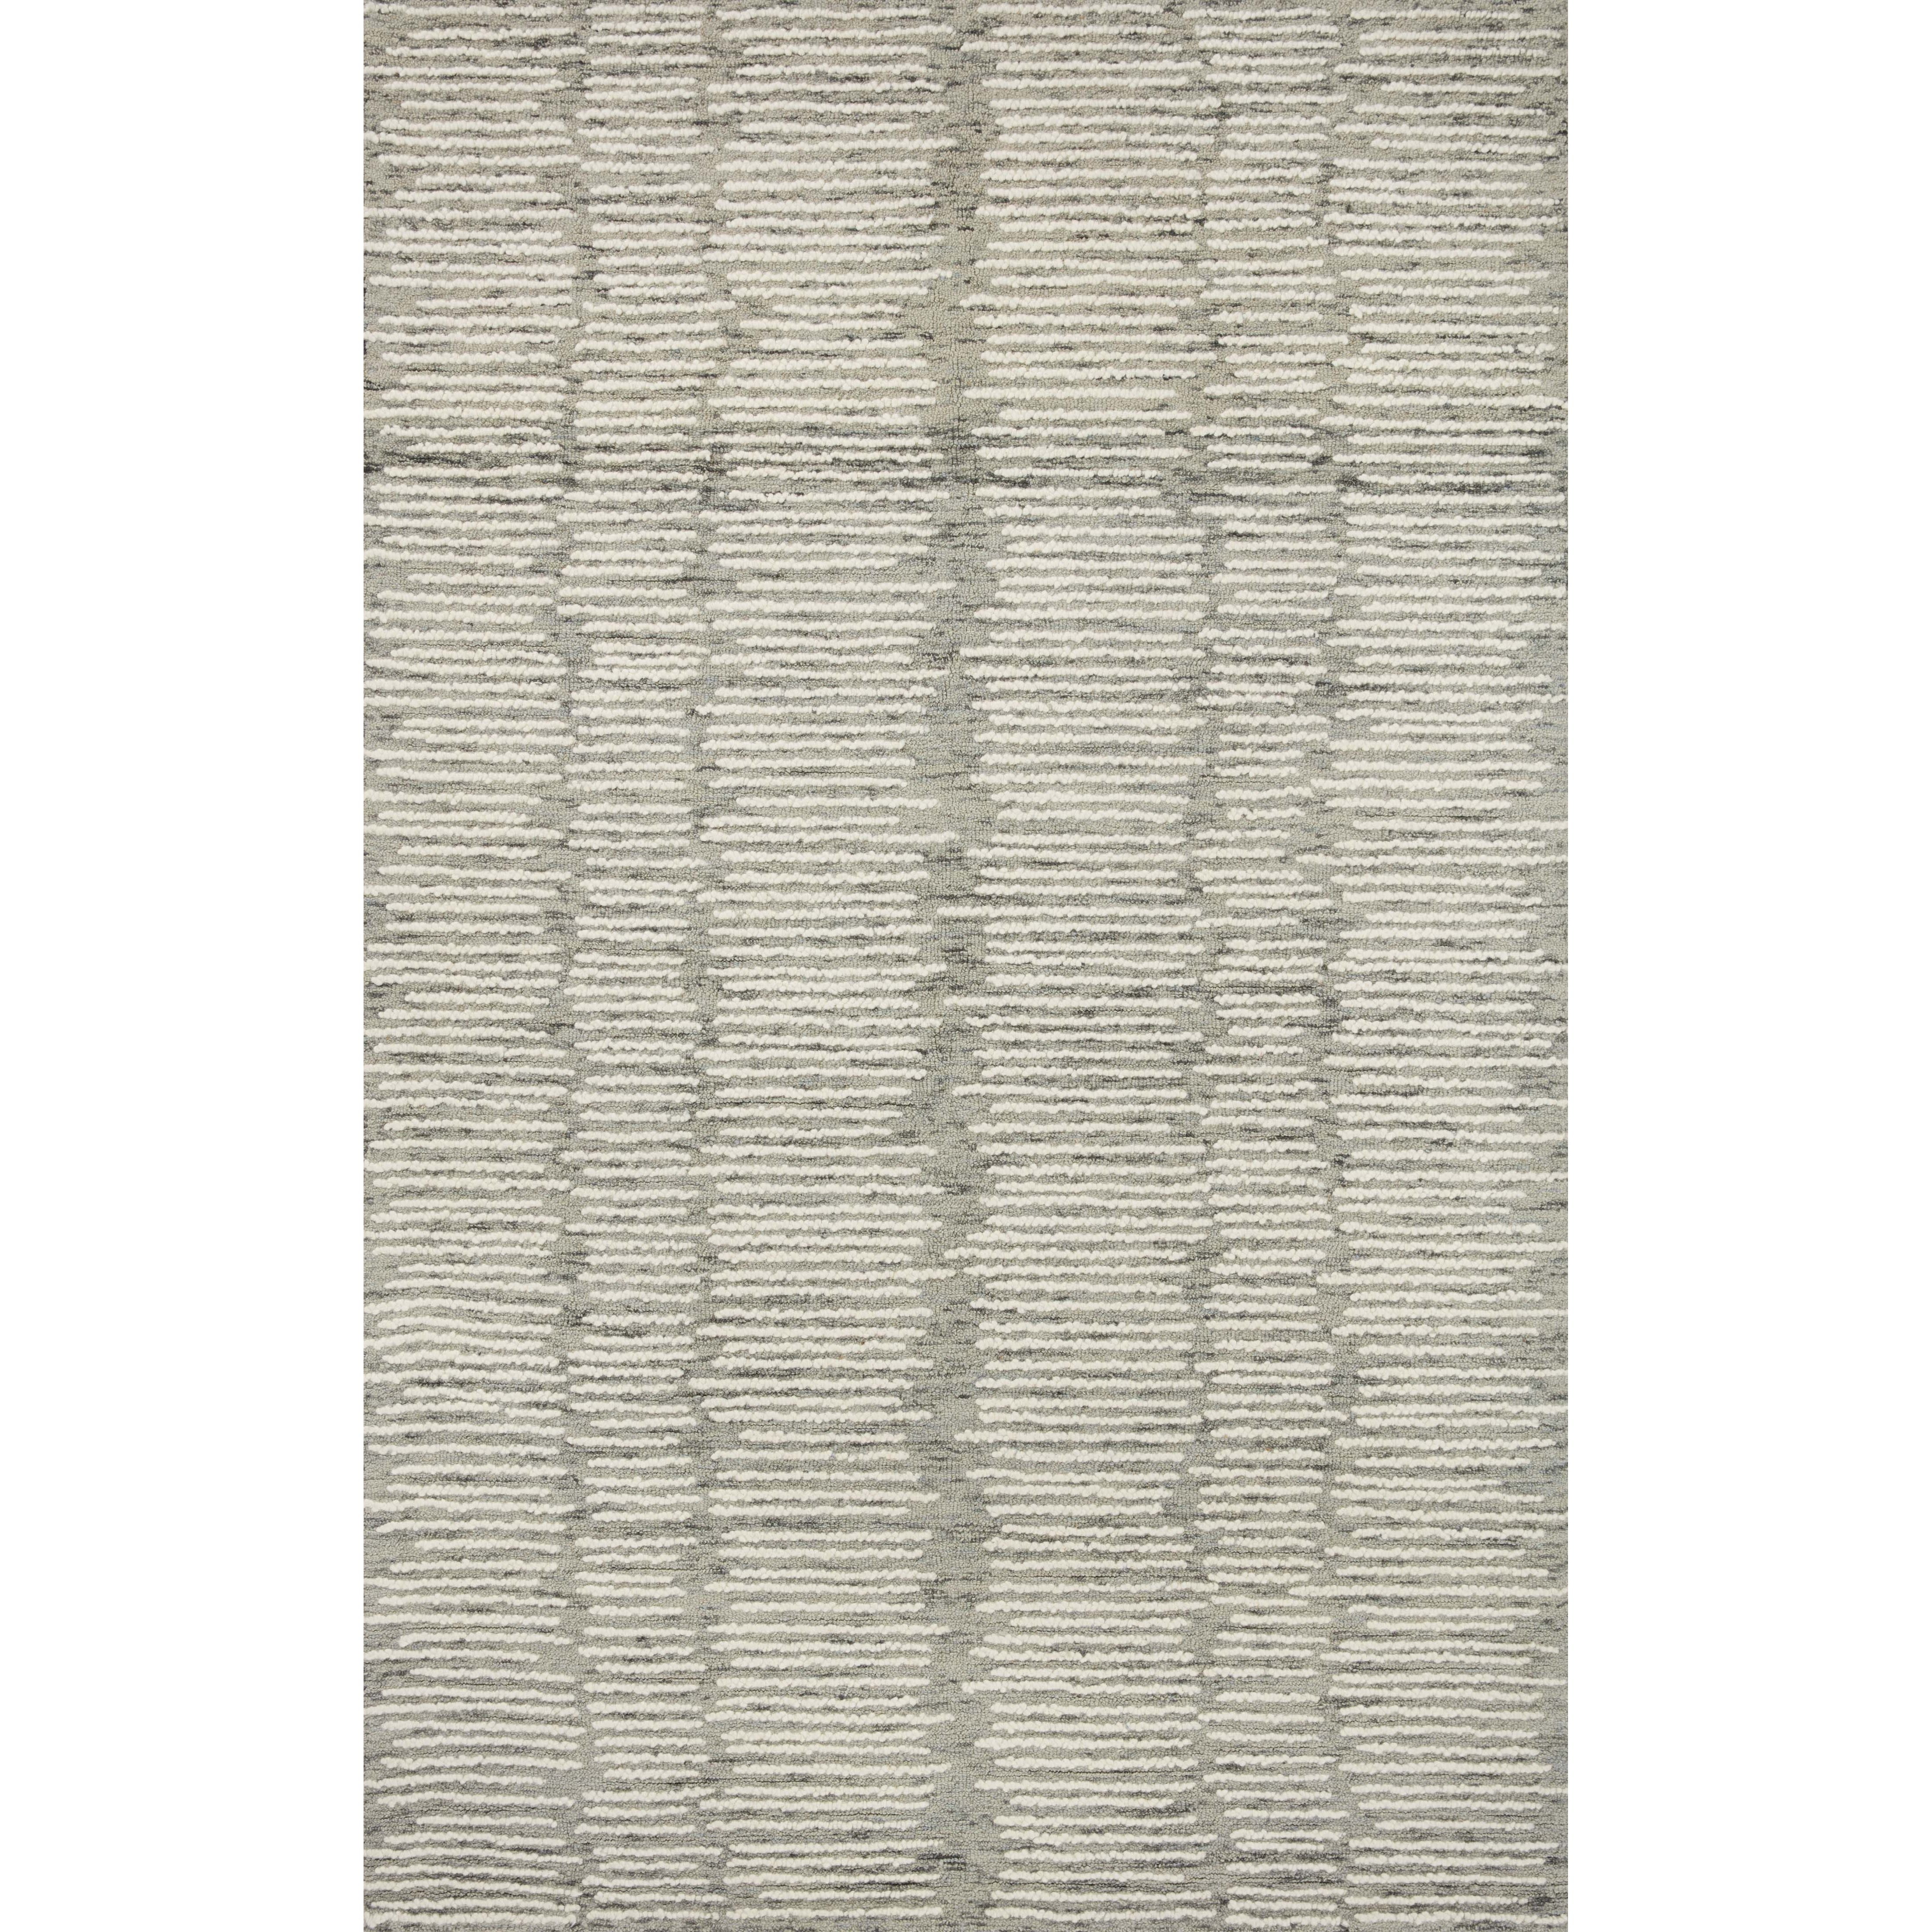 Hand-crafted with a combination of thick and fine yarns, the Tallulah Stone / Ivory Rug area rug creates dynamic dimension in living rooms, bedrooms, and more. The thicker yarns define the abstract, linear design, giving the rug a distinct high-low texture and sense of movement. Tallulah's soft, neutral palettes have a depth of tone inspired by watercolor pigmentation. Amethyst Home provides interior design, new construction, custom furniture, and area rugs in the Miami metro area.